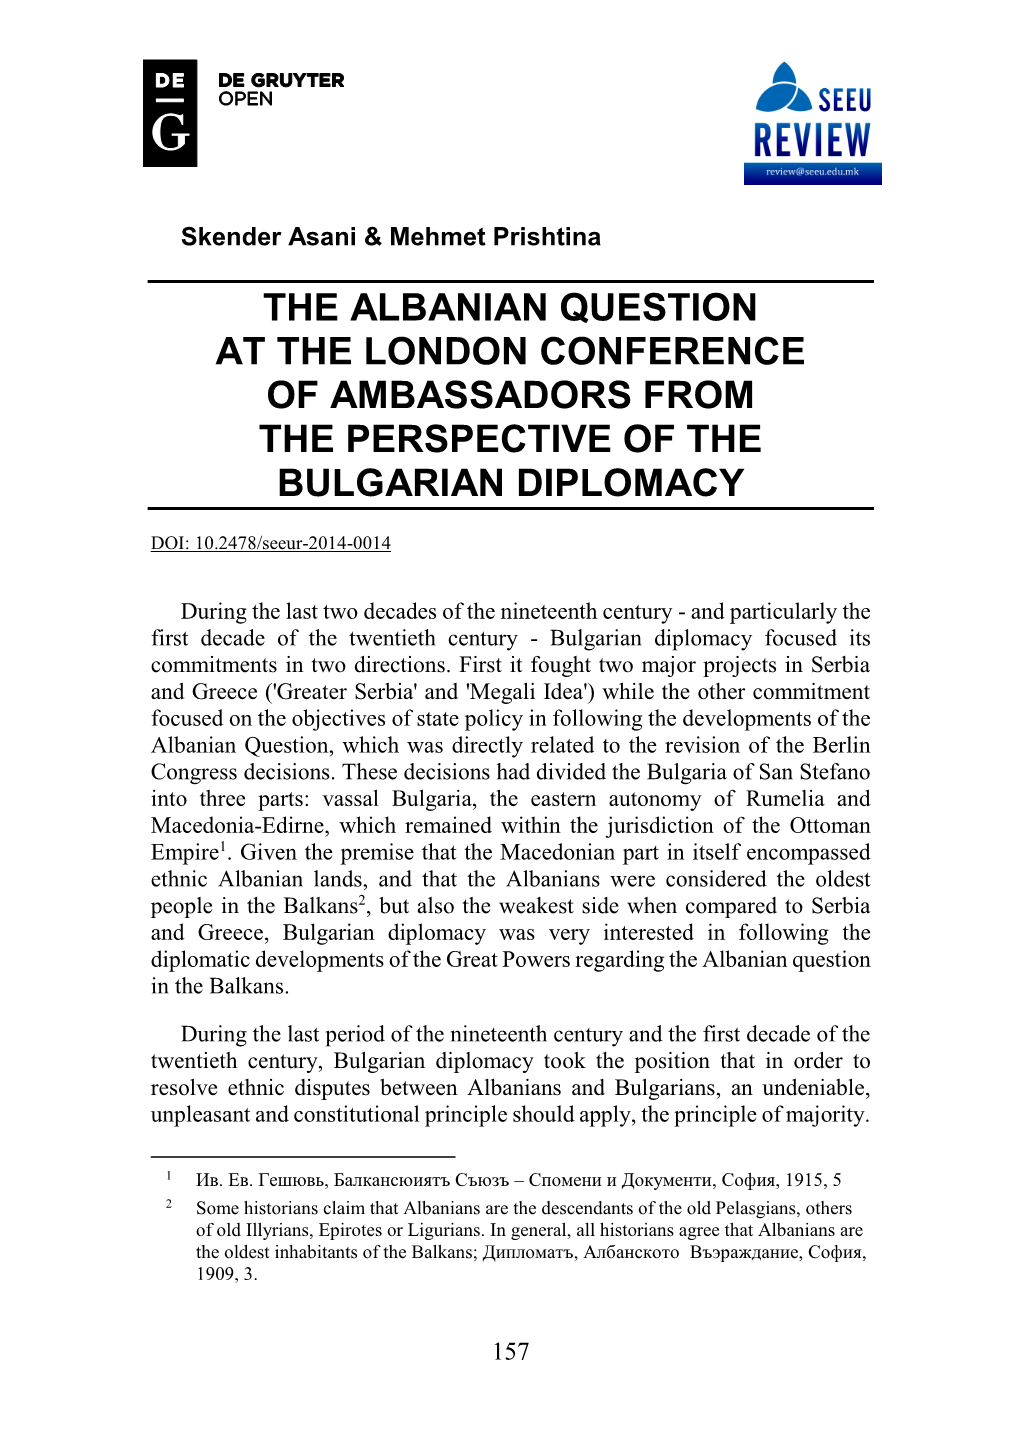 The Albanian Question at the London Conference of Ambassadors from the Perspective of the Bulgarian Diplomacy